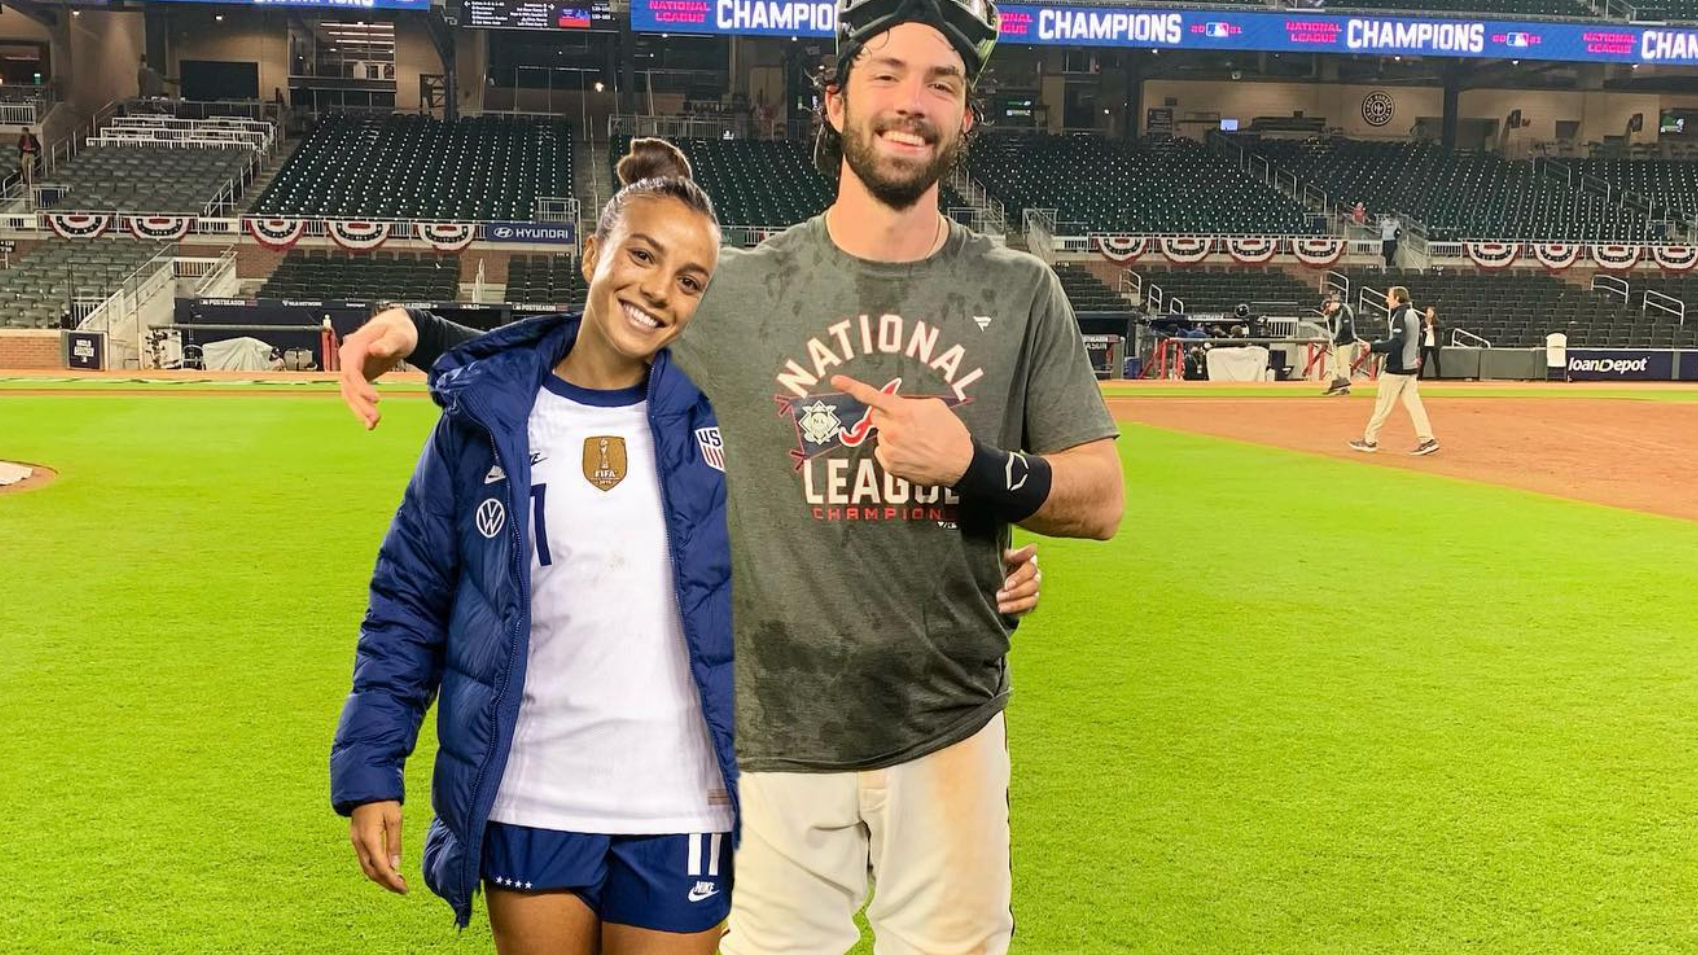 Dansby Swanson Posts New Instagram Photos with Wife Mallory